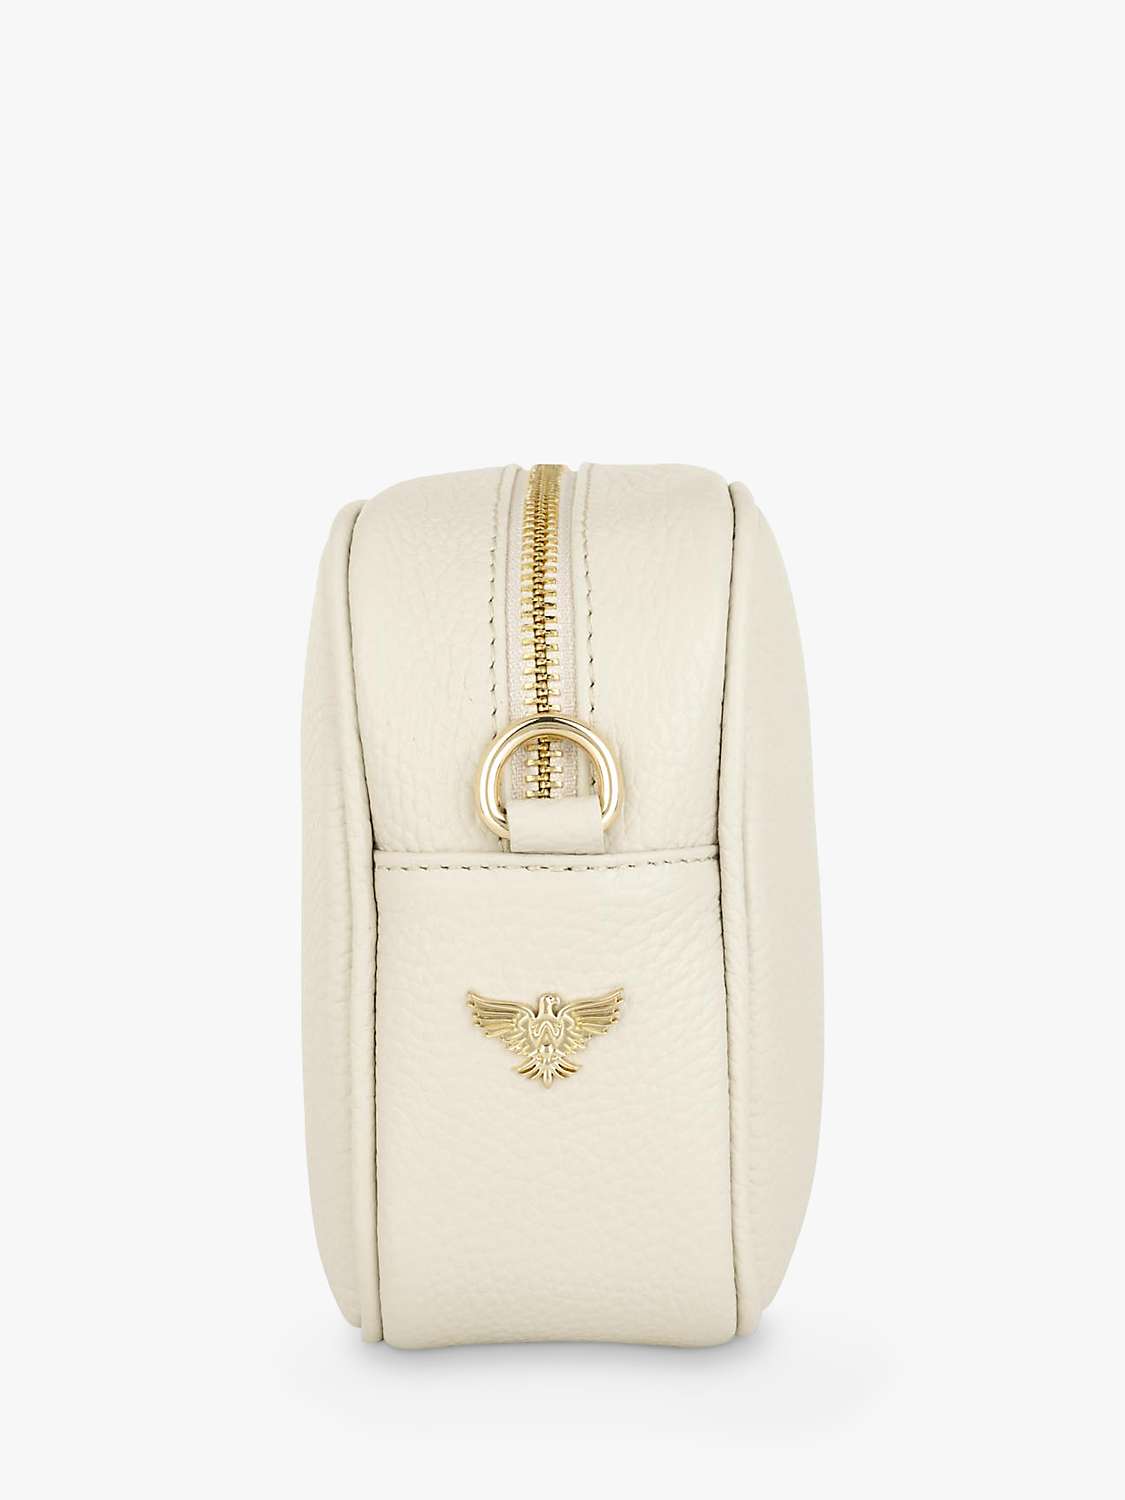 Buy Apatchy Arrow Strap Leather Crossbody Bag, Stone Online at johnlewis.com